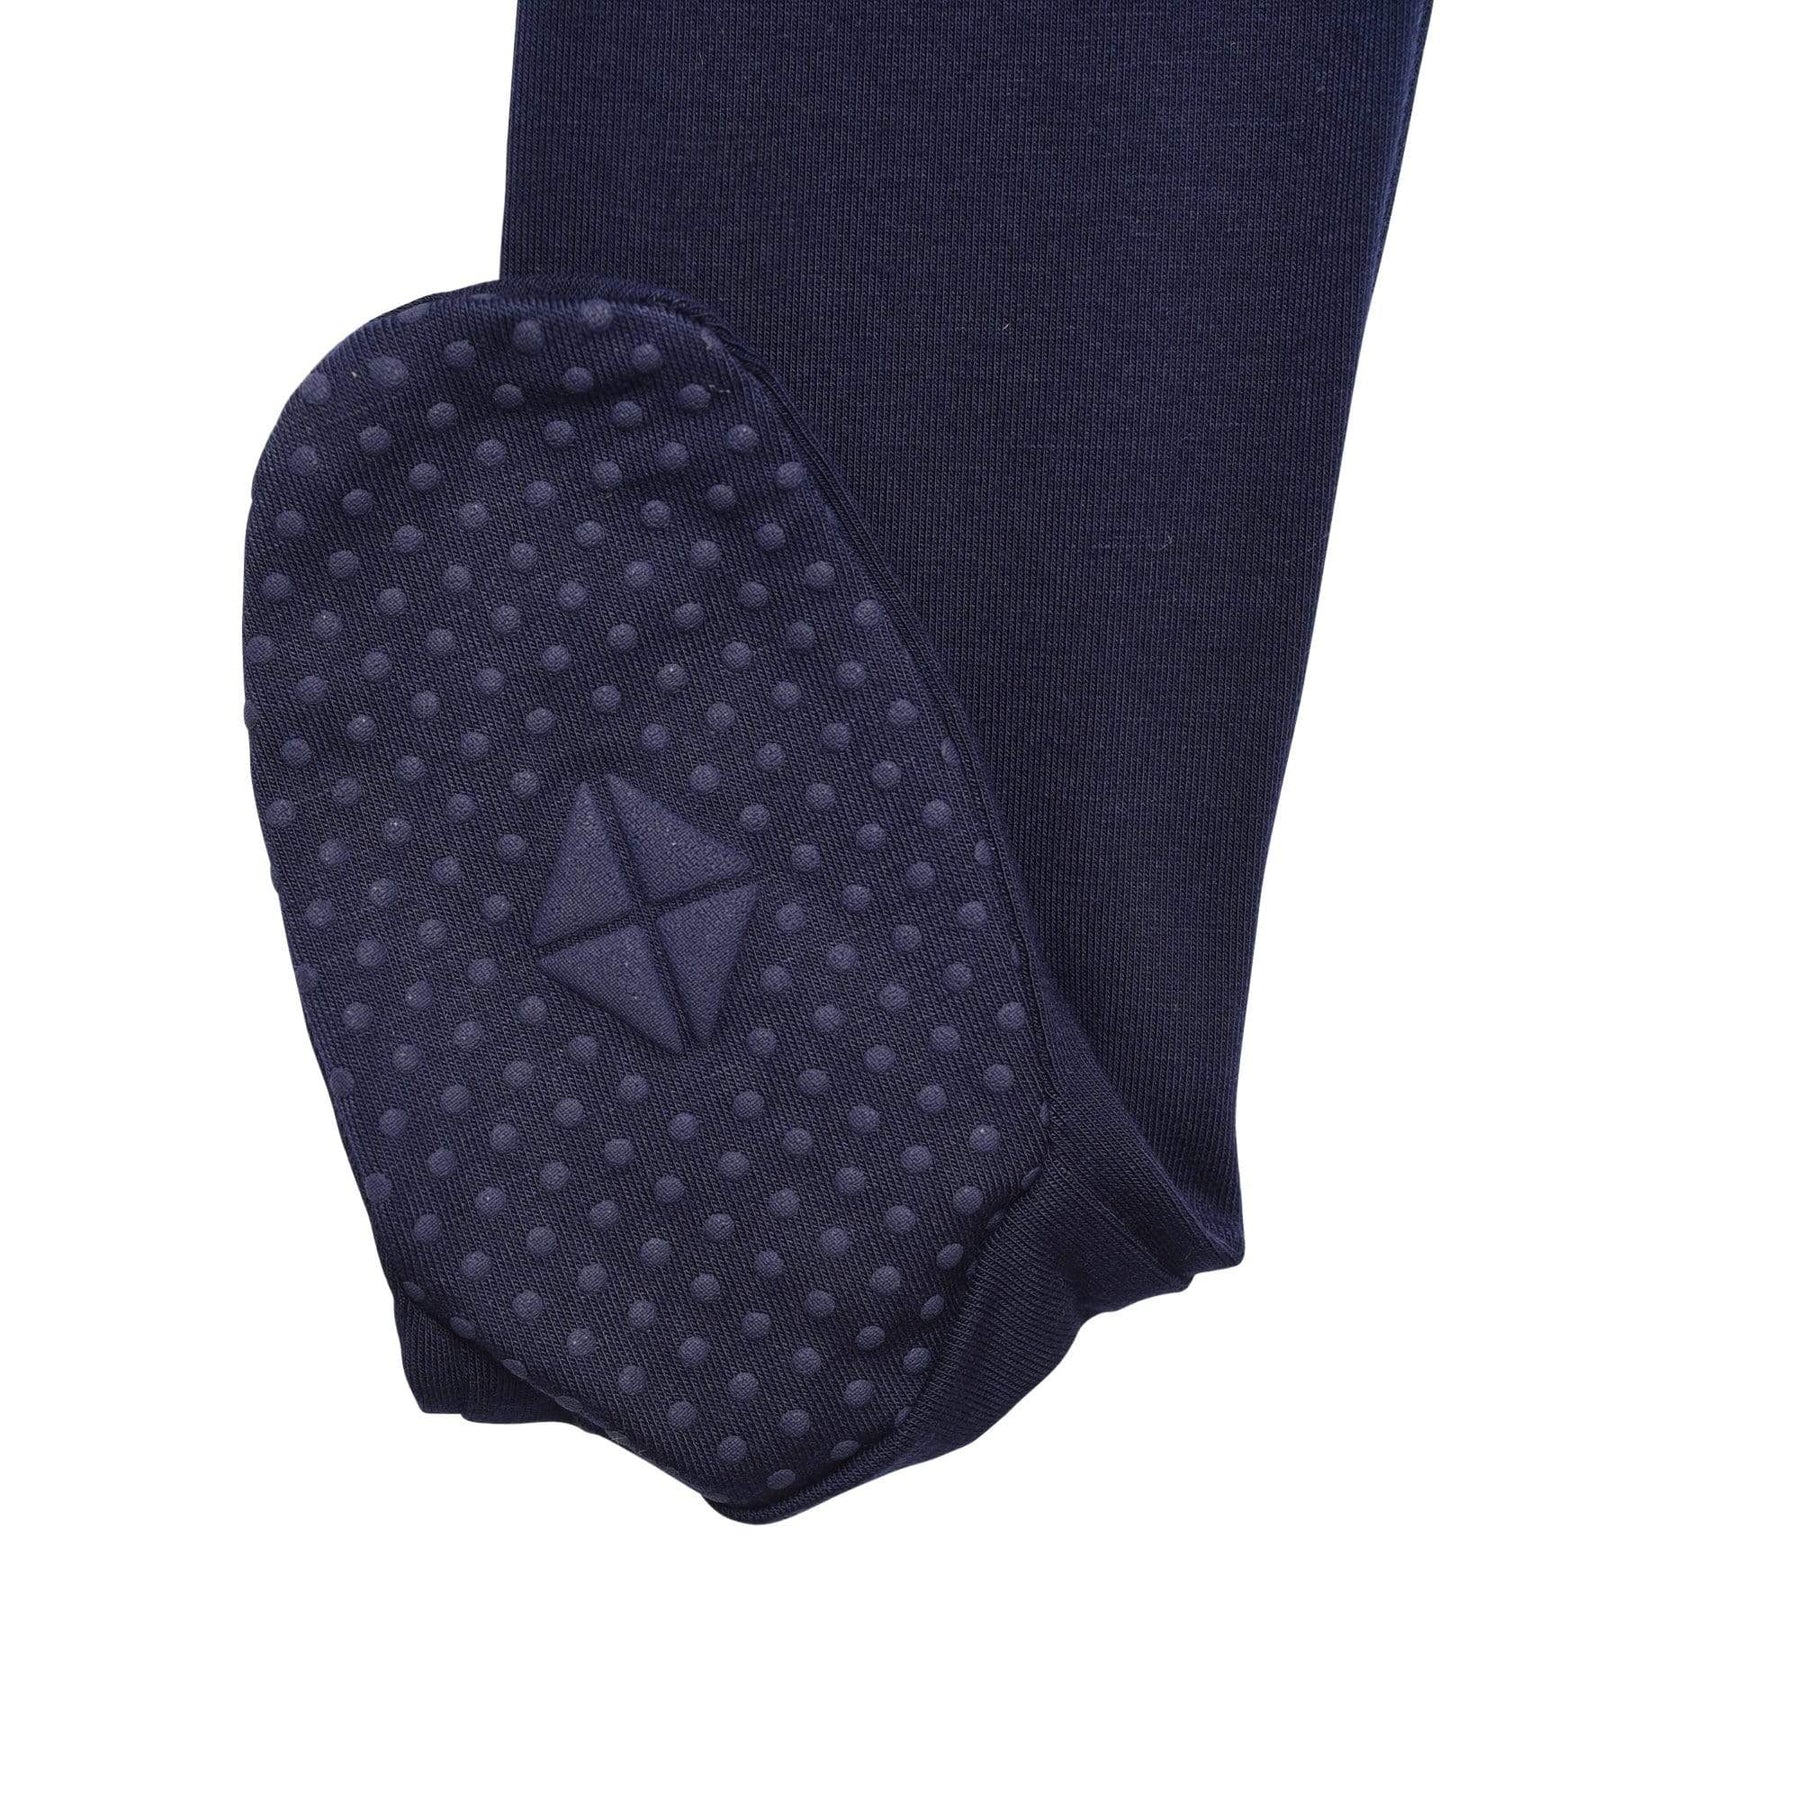 Sole grips on Kyte Baby Zippered Footie in Navy